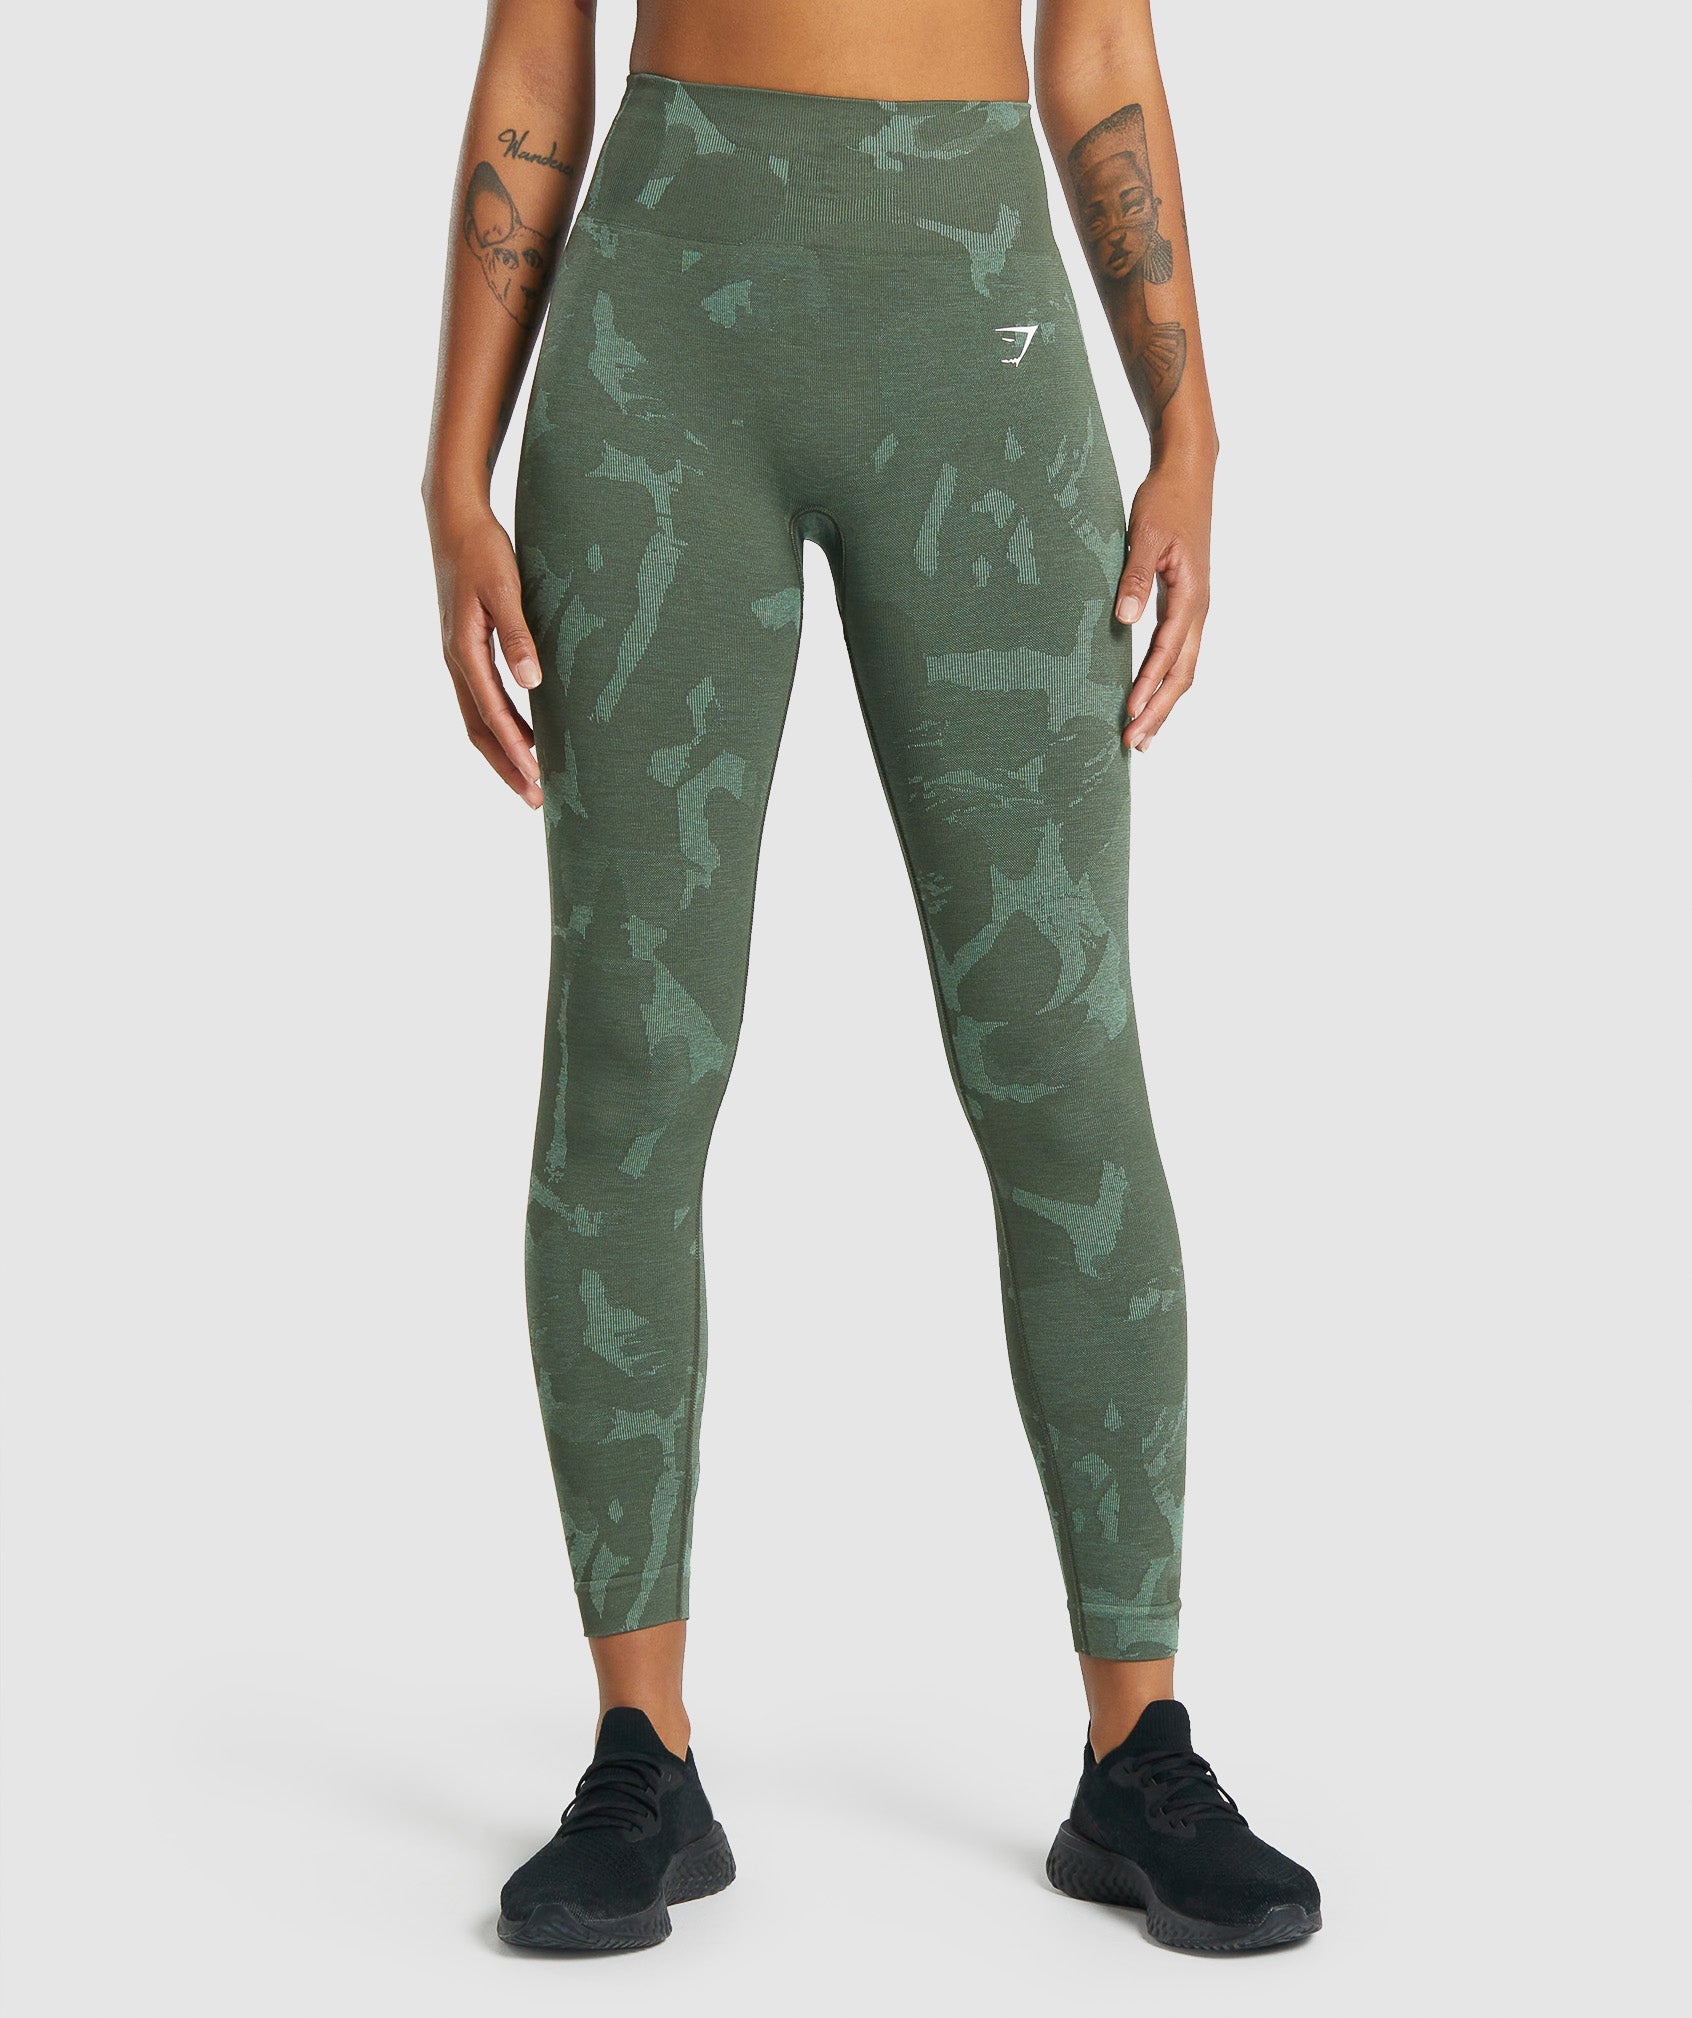 Adapt Camo Seamless Leggings in Savanna | Green is out of stock